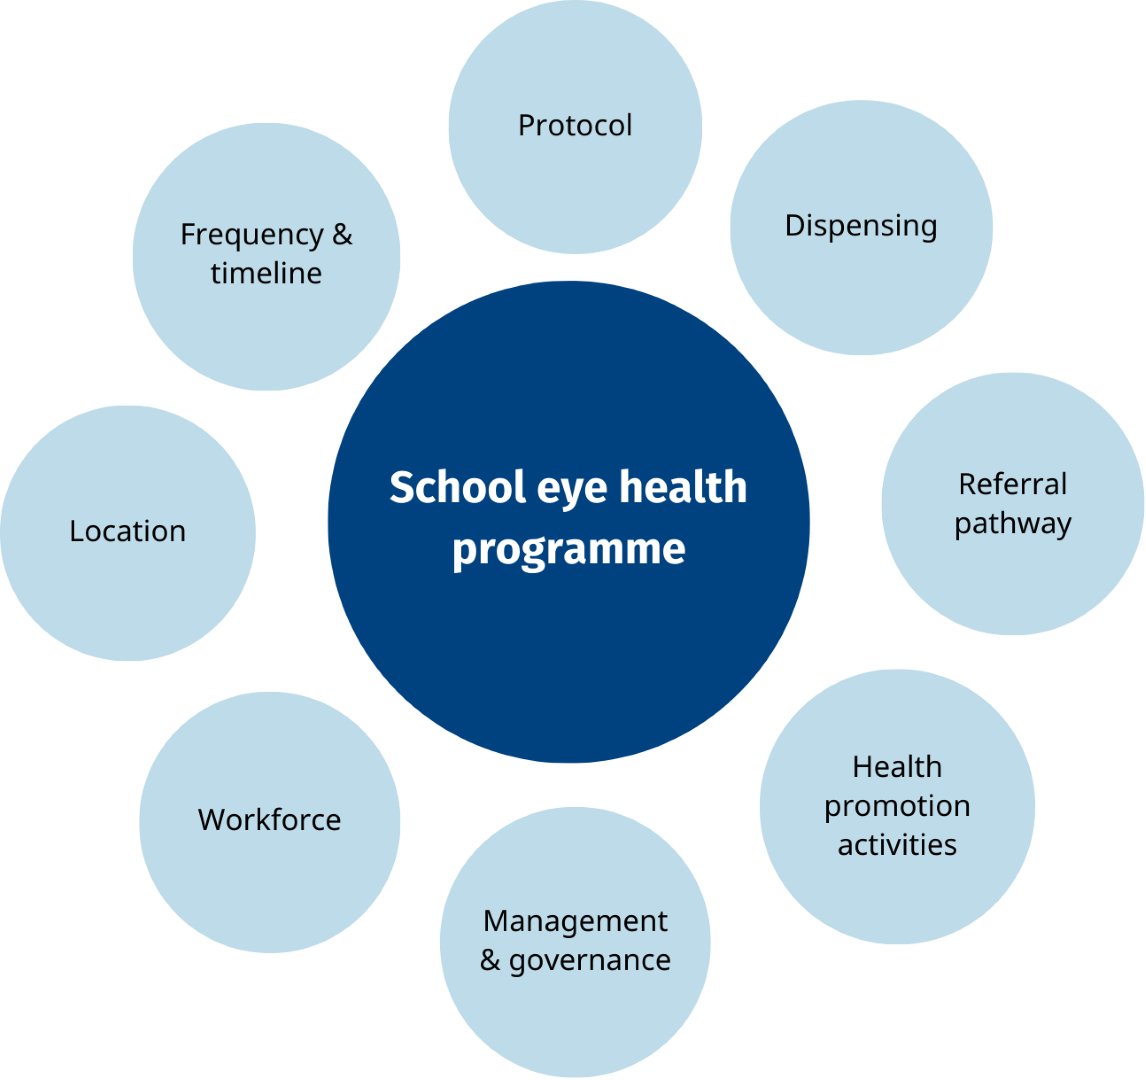 A circular diagram with "School eye health programme" in the centre, surrounded by bubbles for protocol, dispensing, referral pathway, health promotion activities, management & governance, workforce, location, and frequency & timeline.